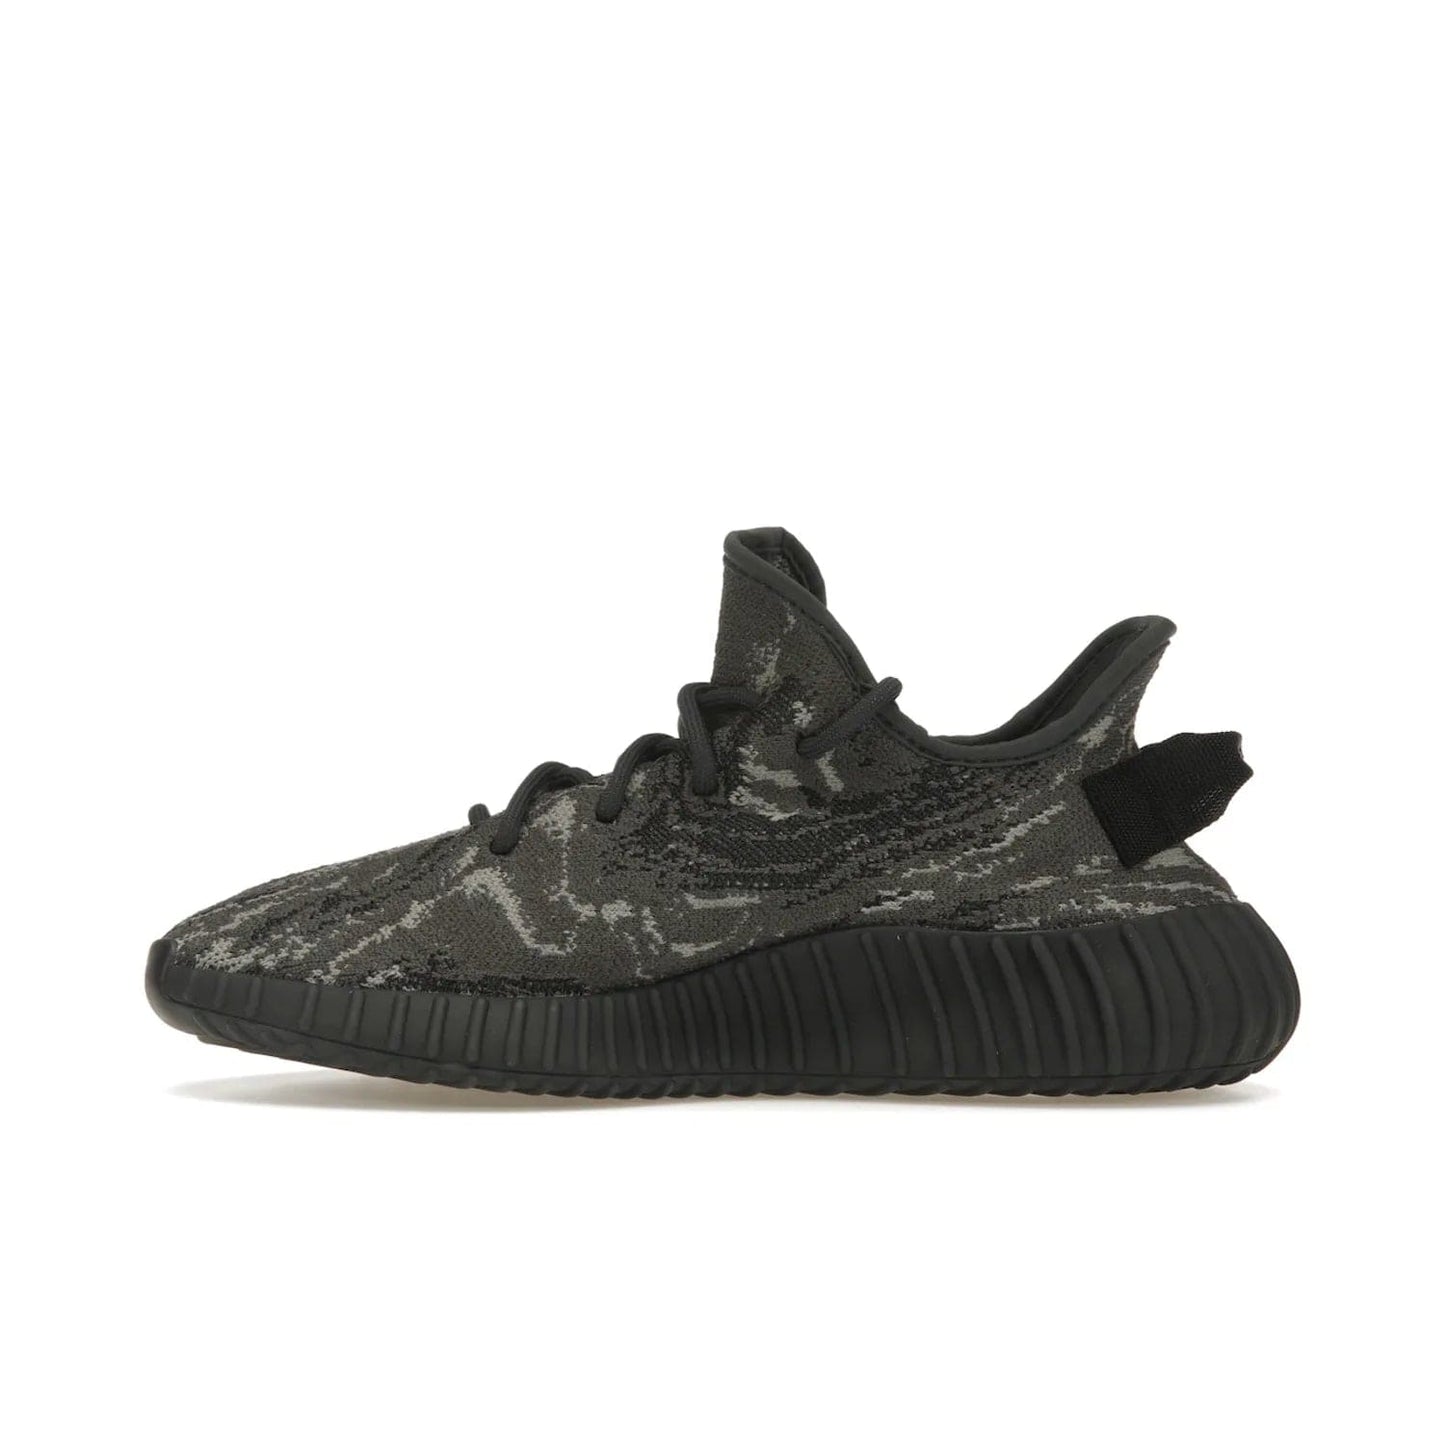 adidas Yeezy Boost 350 V2 MX Dark Salt - Image 19 - Only at www.BallersClubKickz.com - ##
The adidas Yeezy Boost 350 V2 MX Dark Salt offers a contemporary look with a signature combination of grey and black hues. Cushioned Boost midsole and side stripe allow for all day wear. Get the perfect fashion-forward addition with this sleek sneaker for $230.